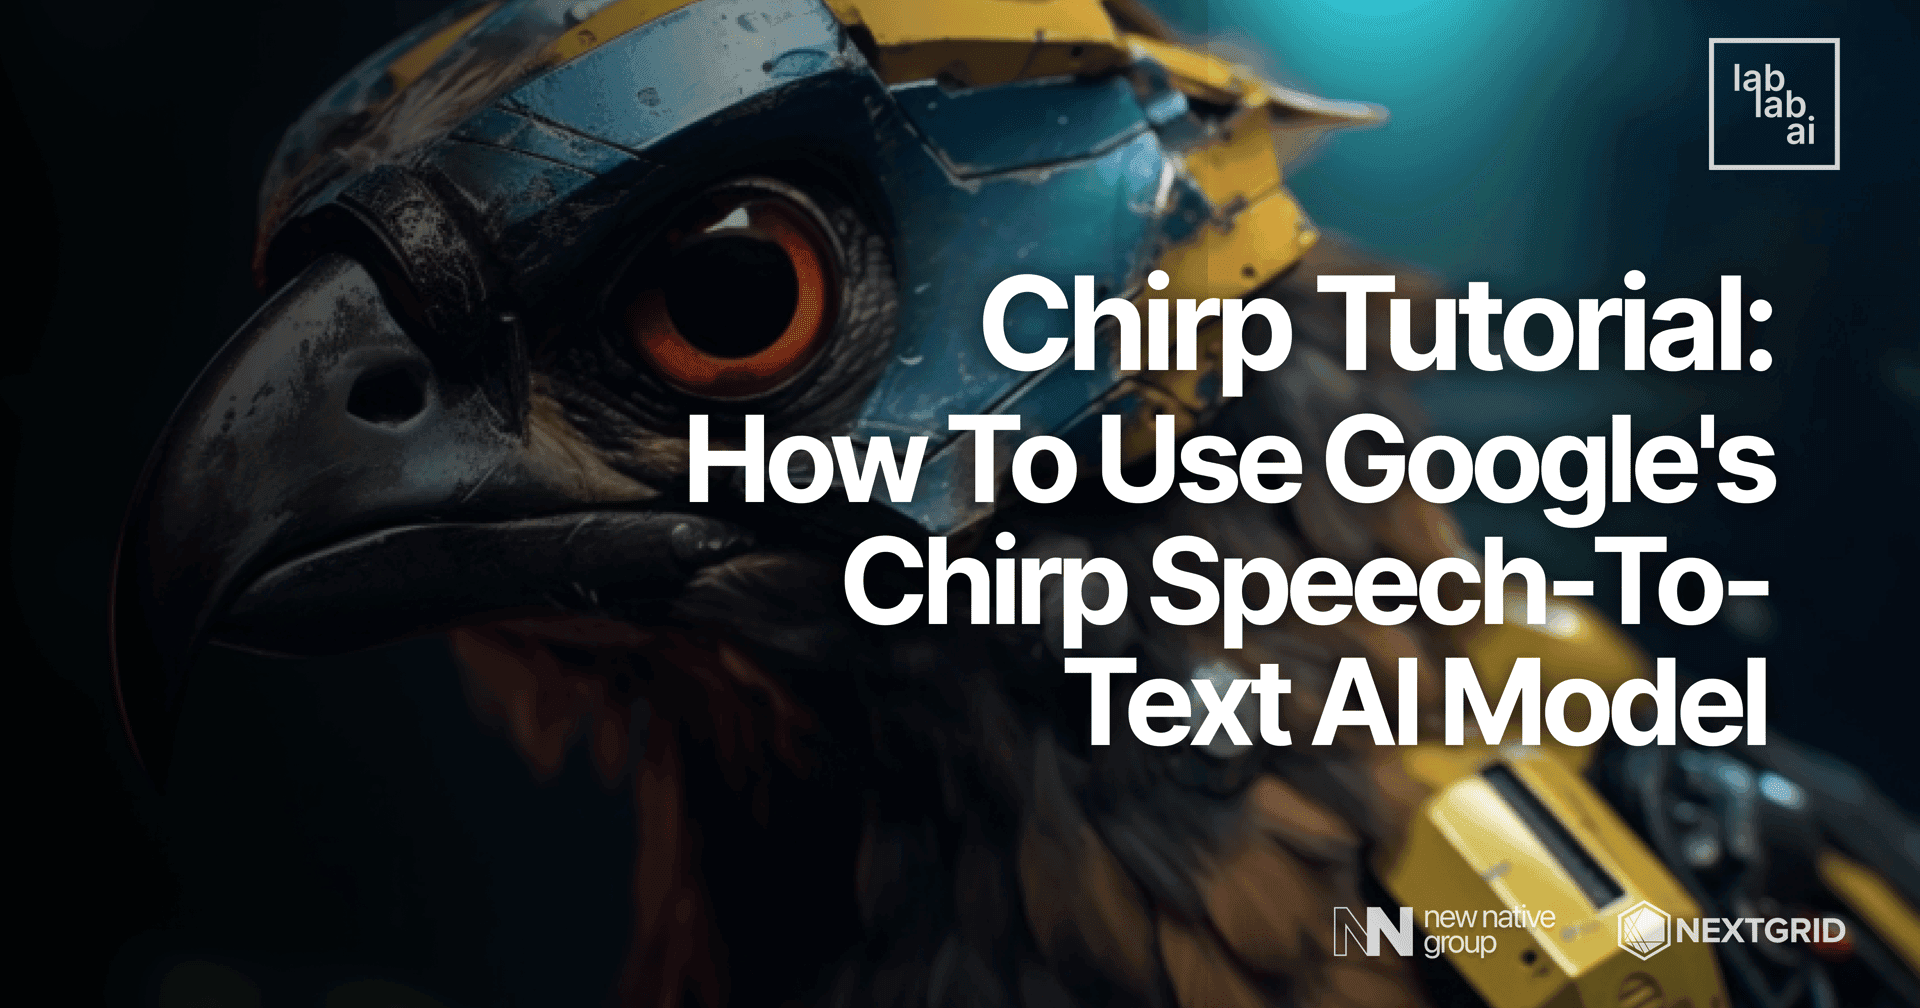 Chirp Tutorial: How to use Google's Chirp speech-to-text AI model on Google Cloud console.